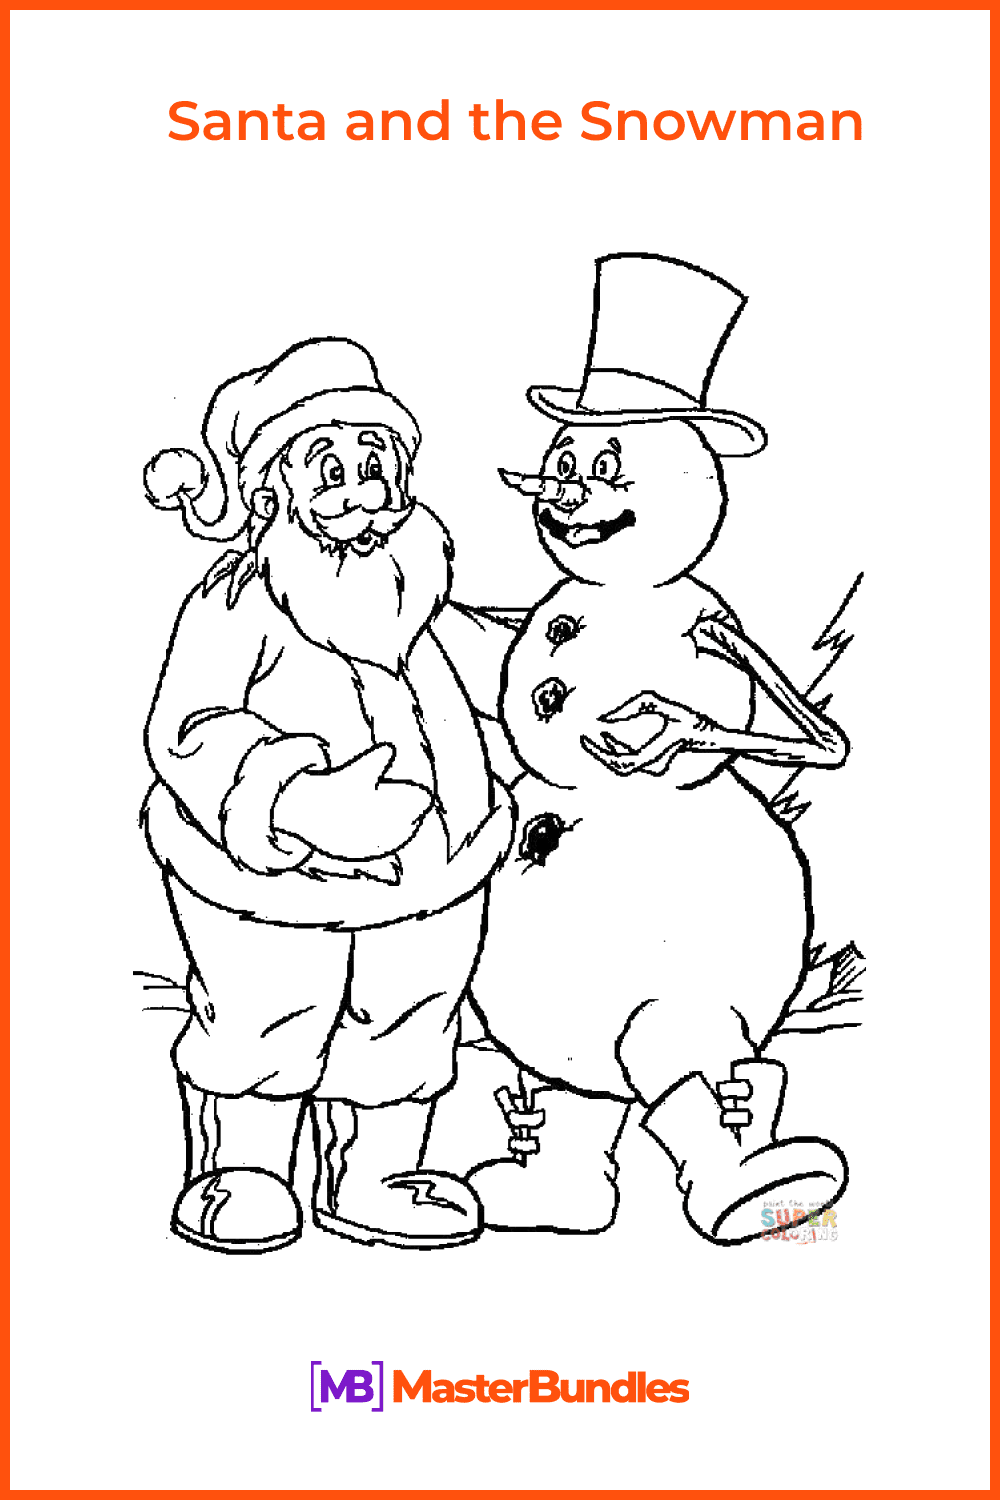 Santa and the Snowman coloring page pinterest image.